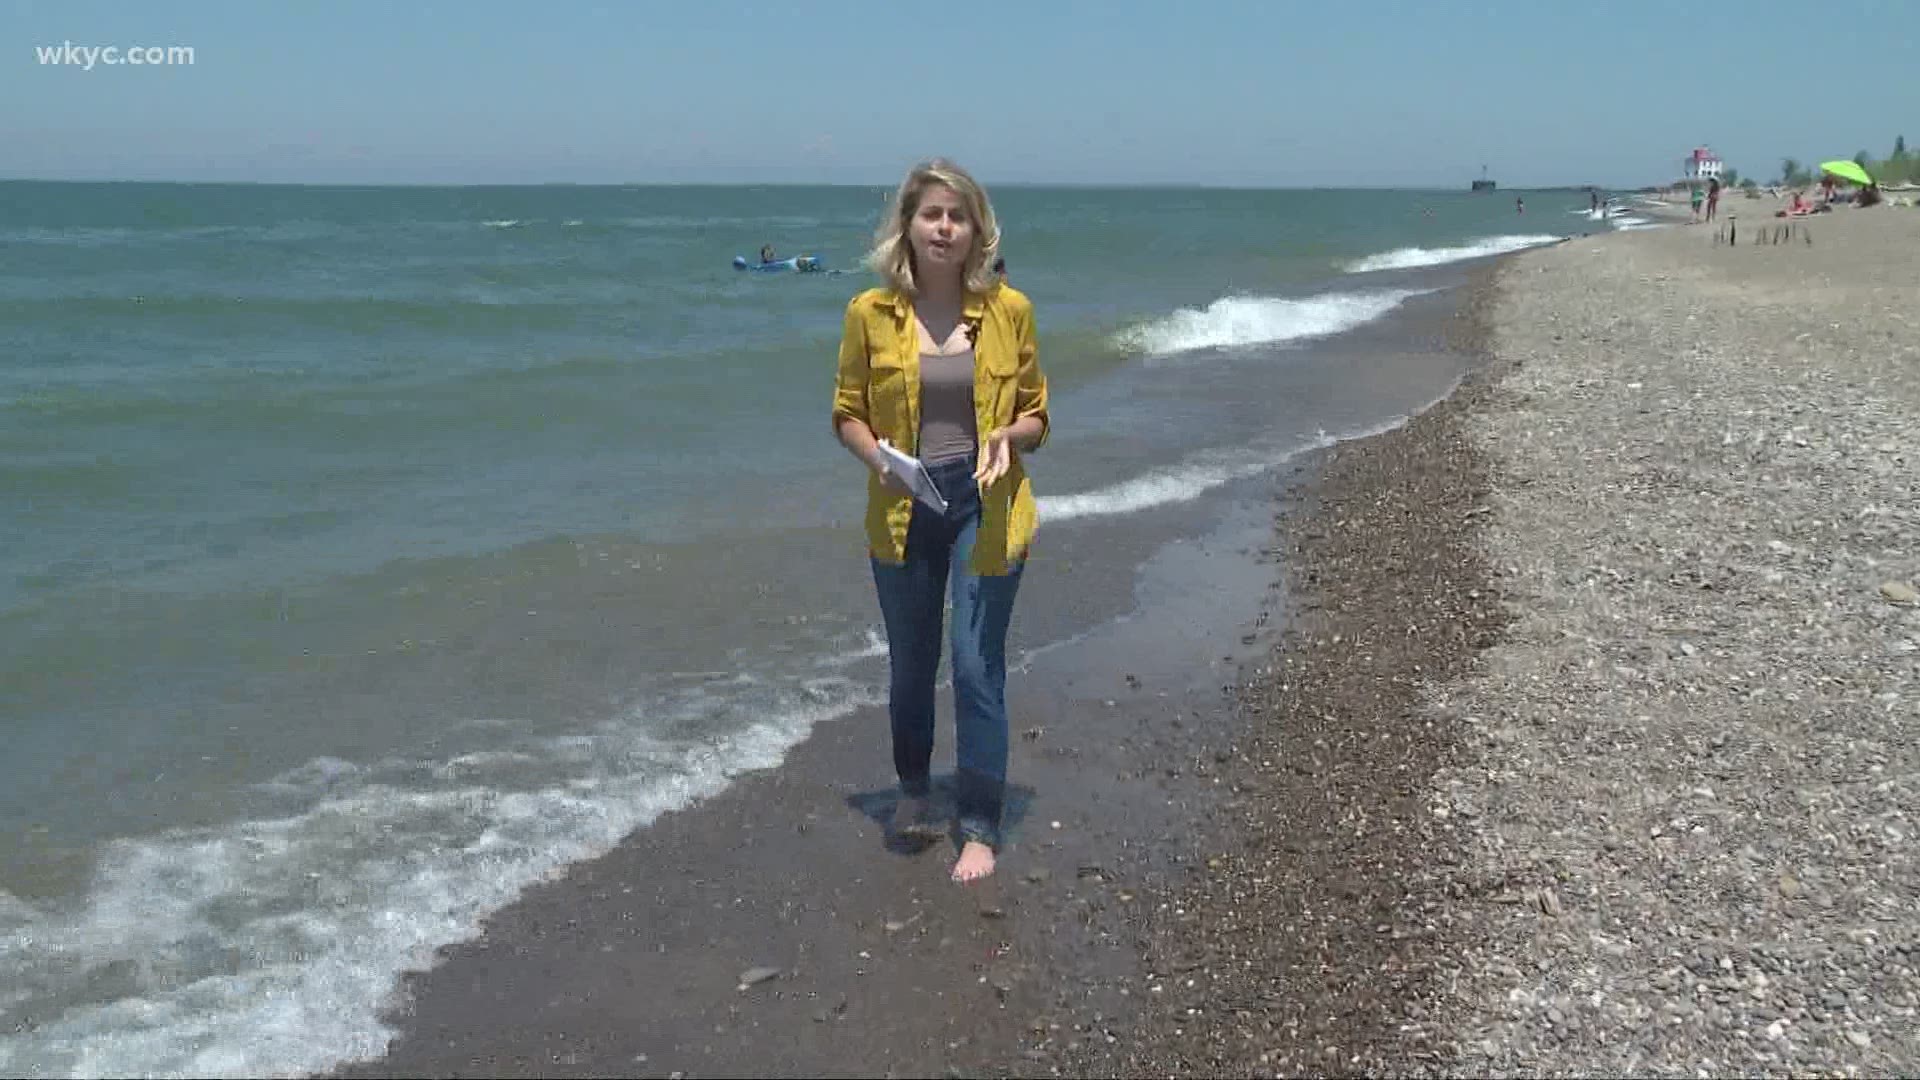 Officials are anticipating a busy weekend on the water. 3News' Rachael Polansky reports.